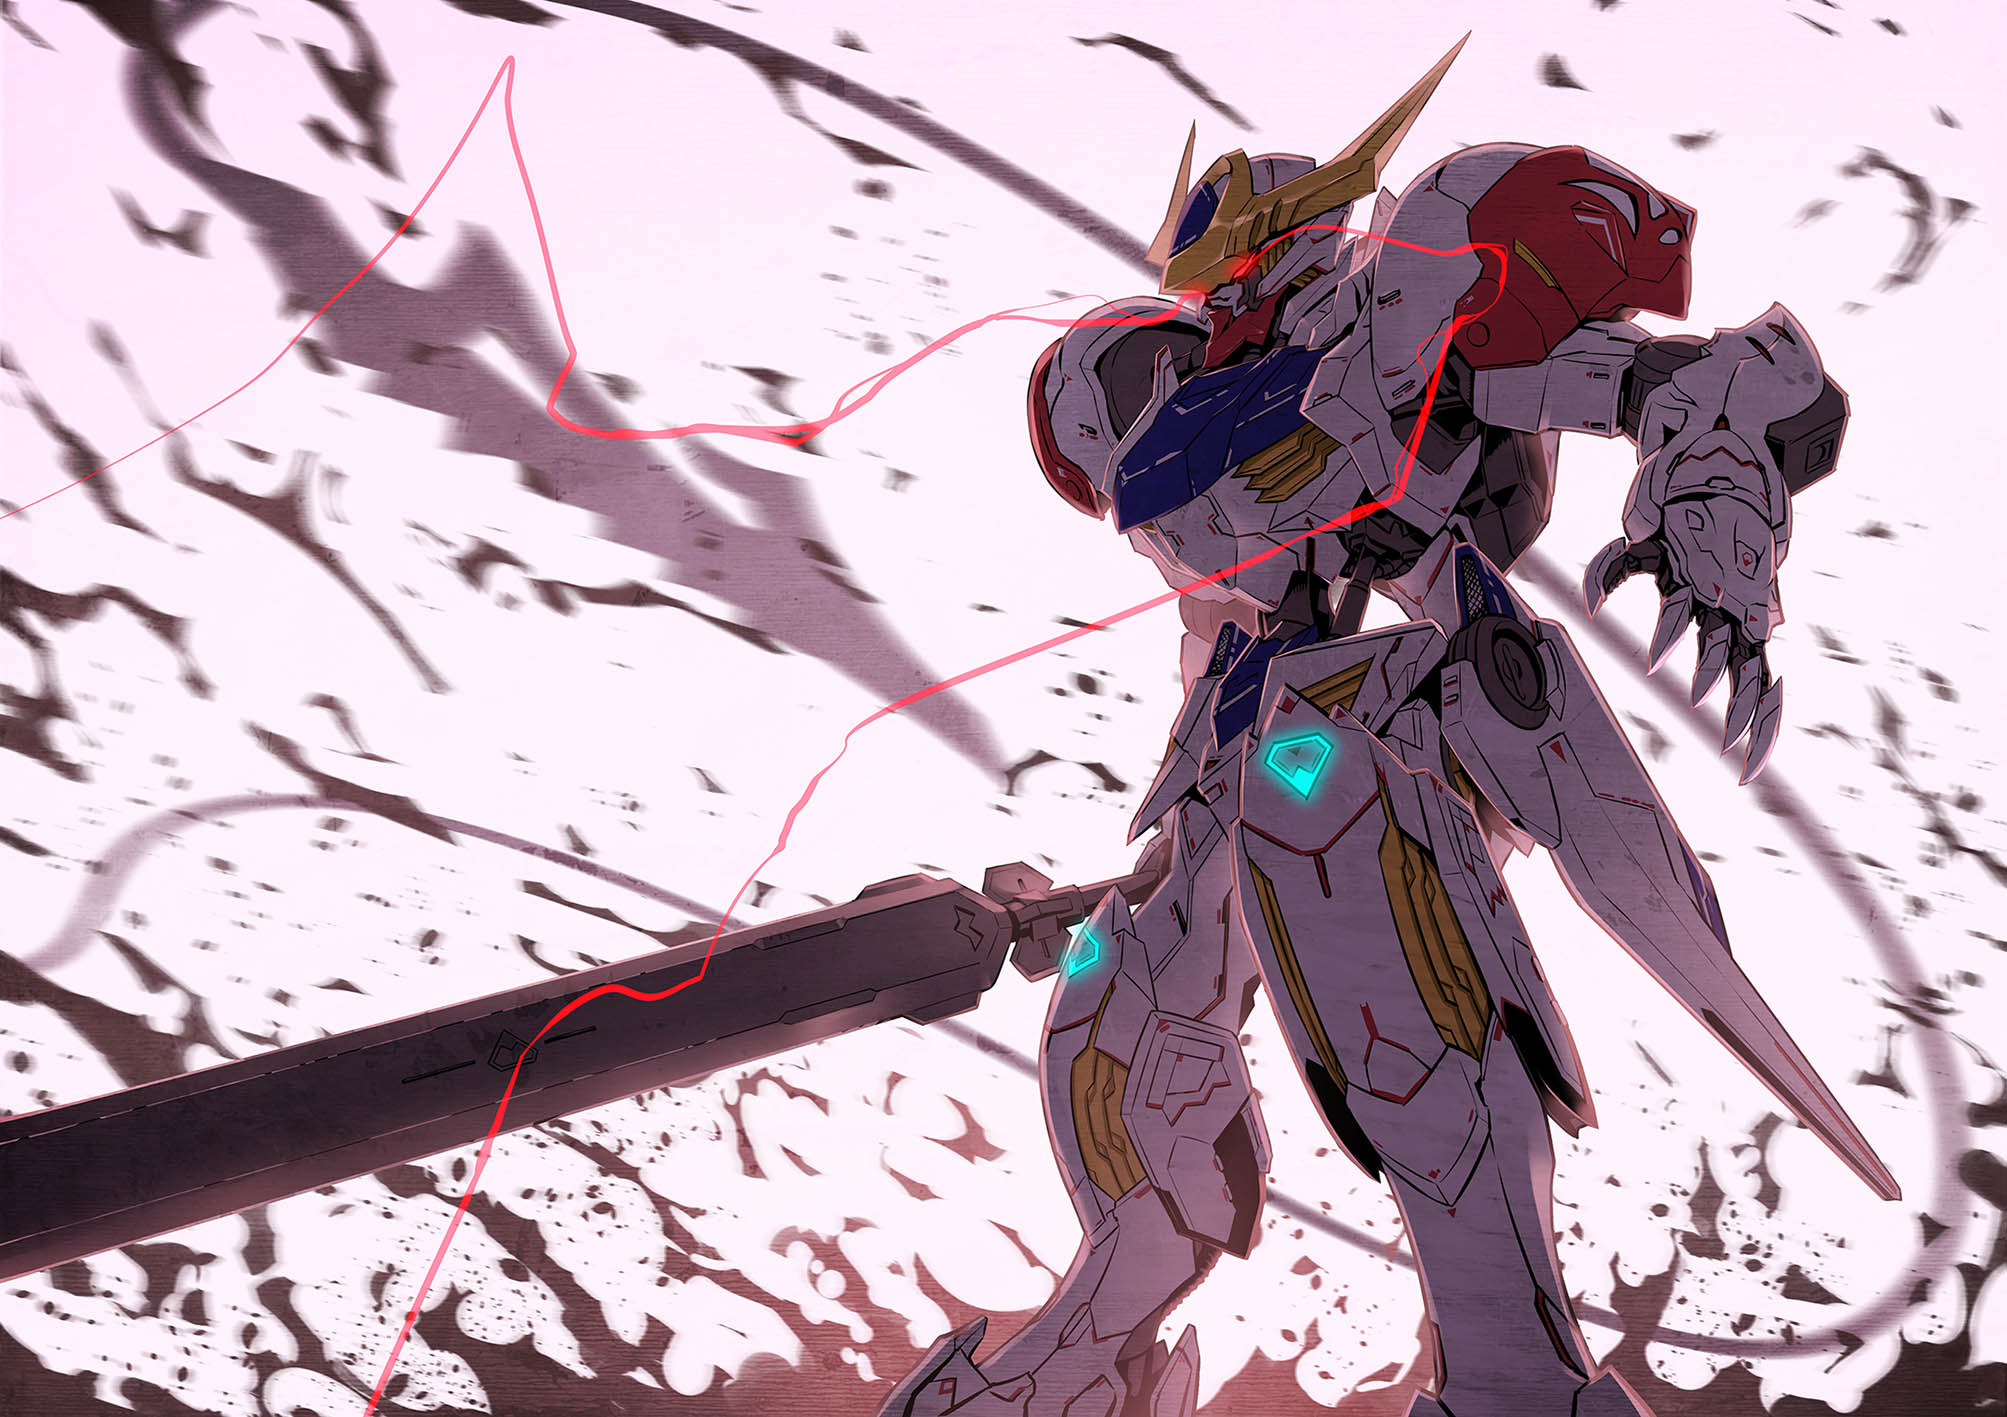 Anime Mobile Suit Gundam: Iron-Blooded Orphans HD Wallpaper | Background Image